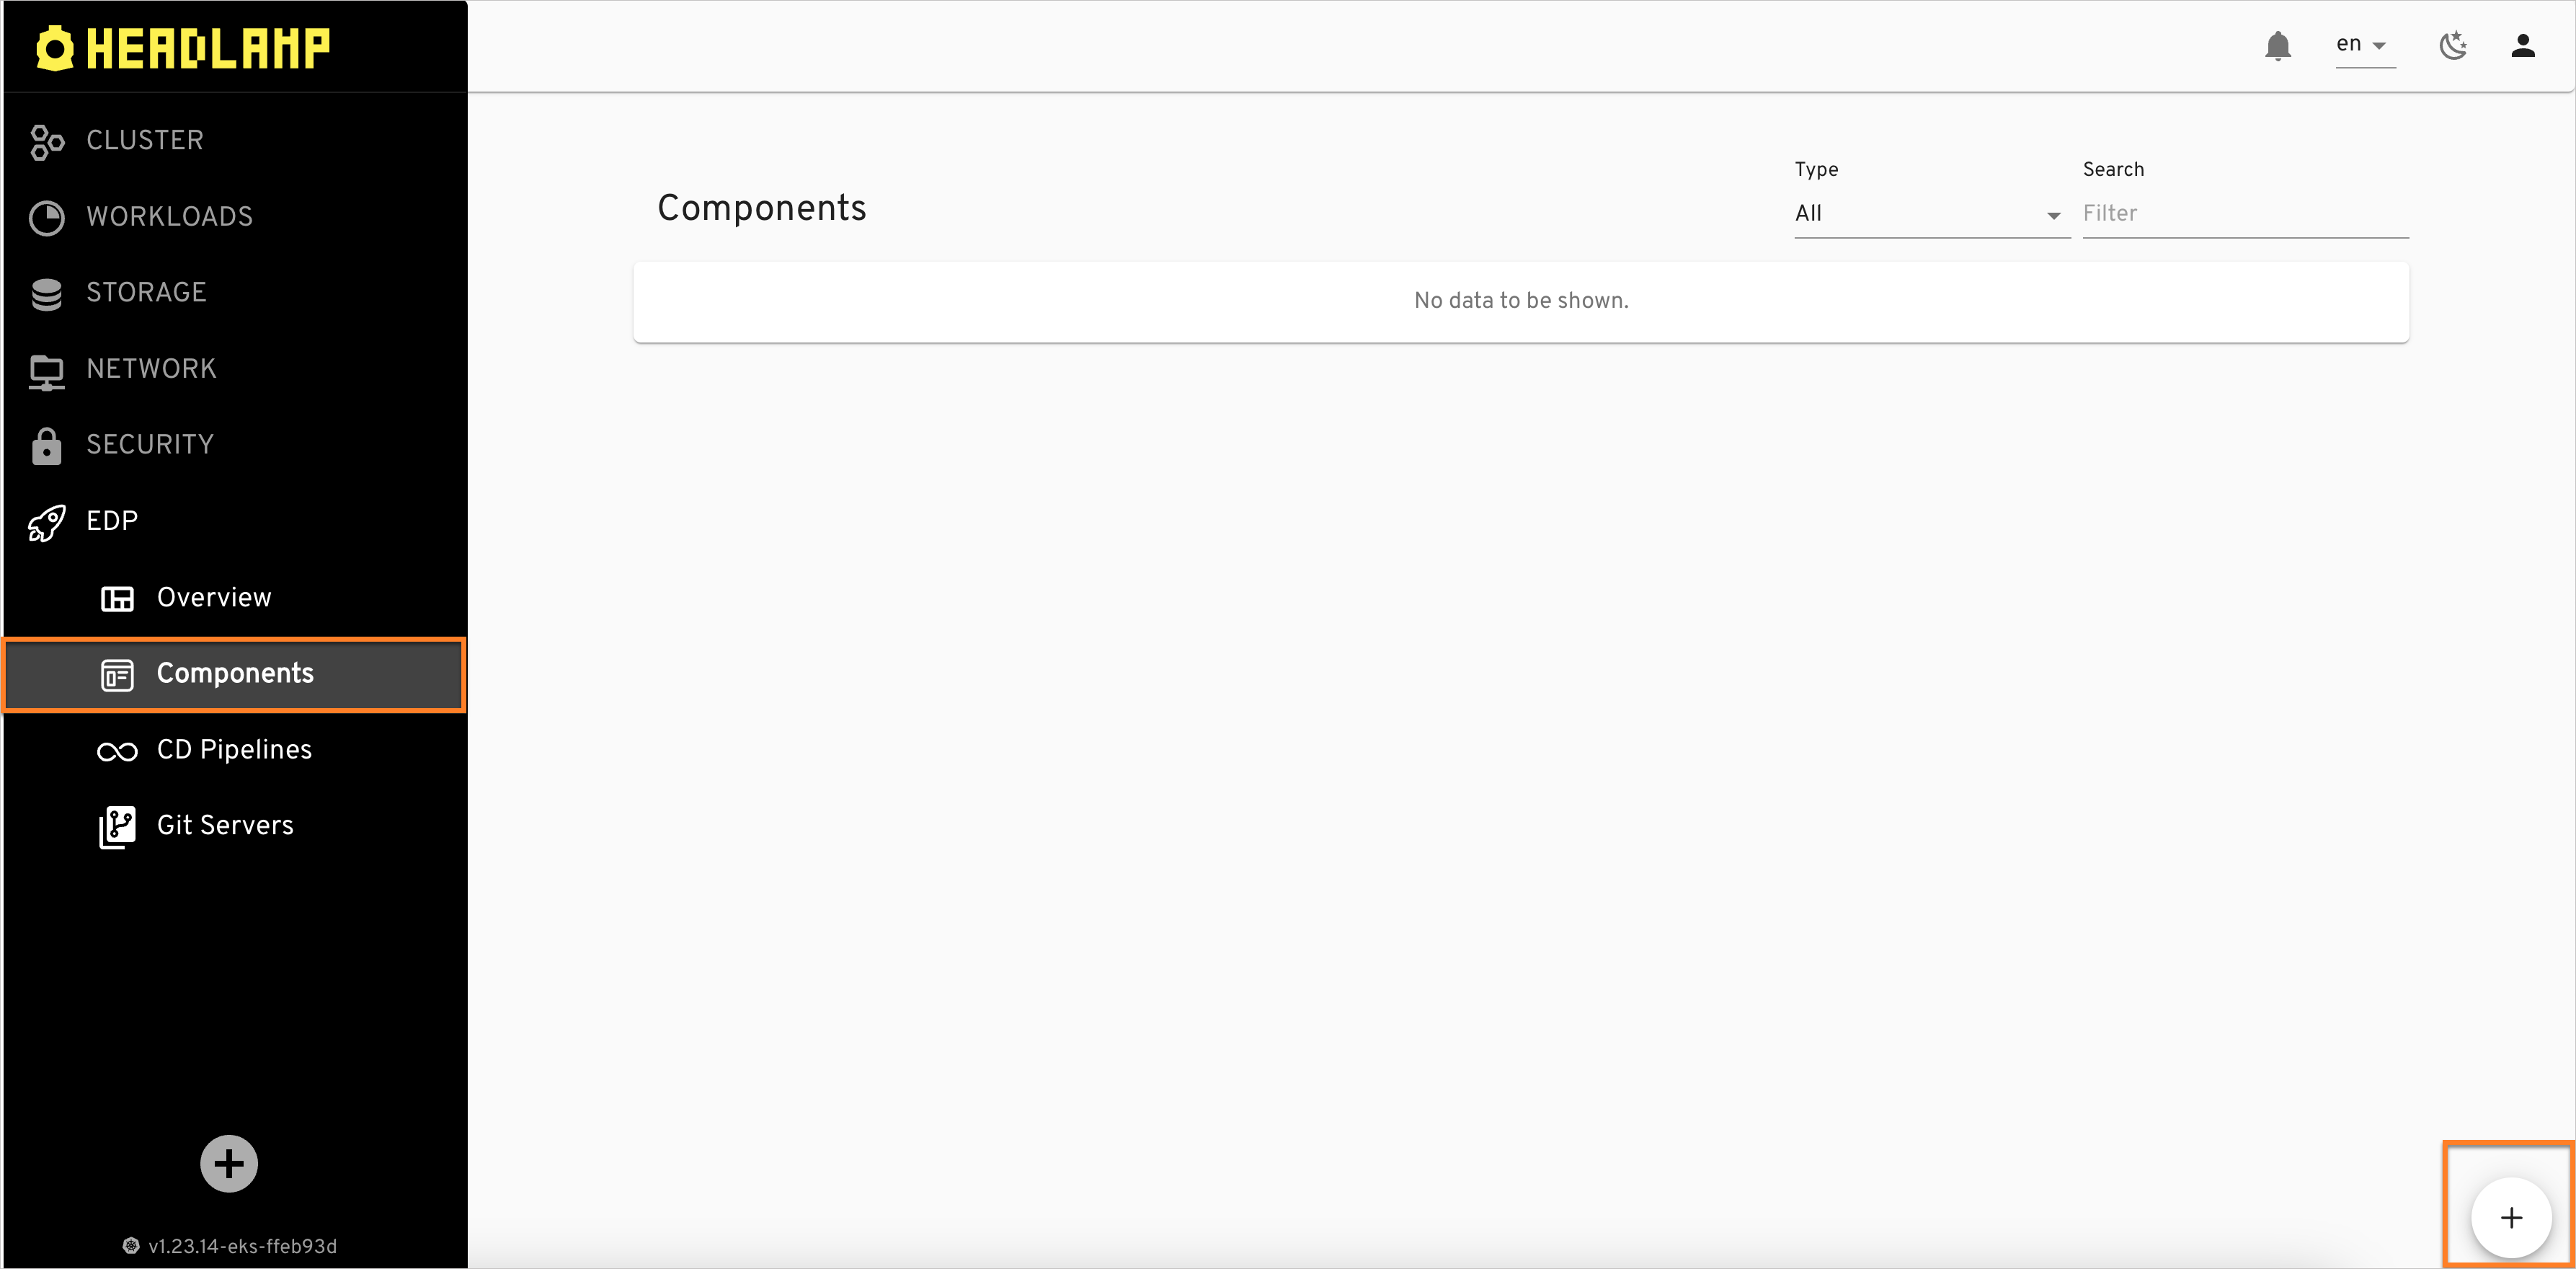 Components Overview